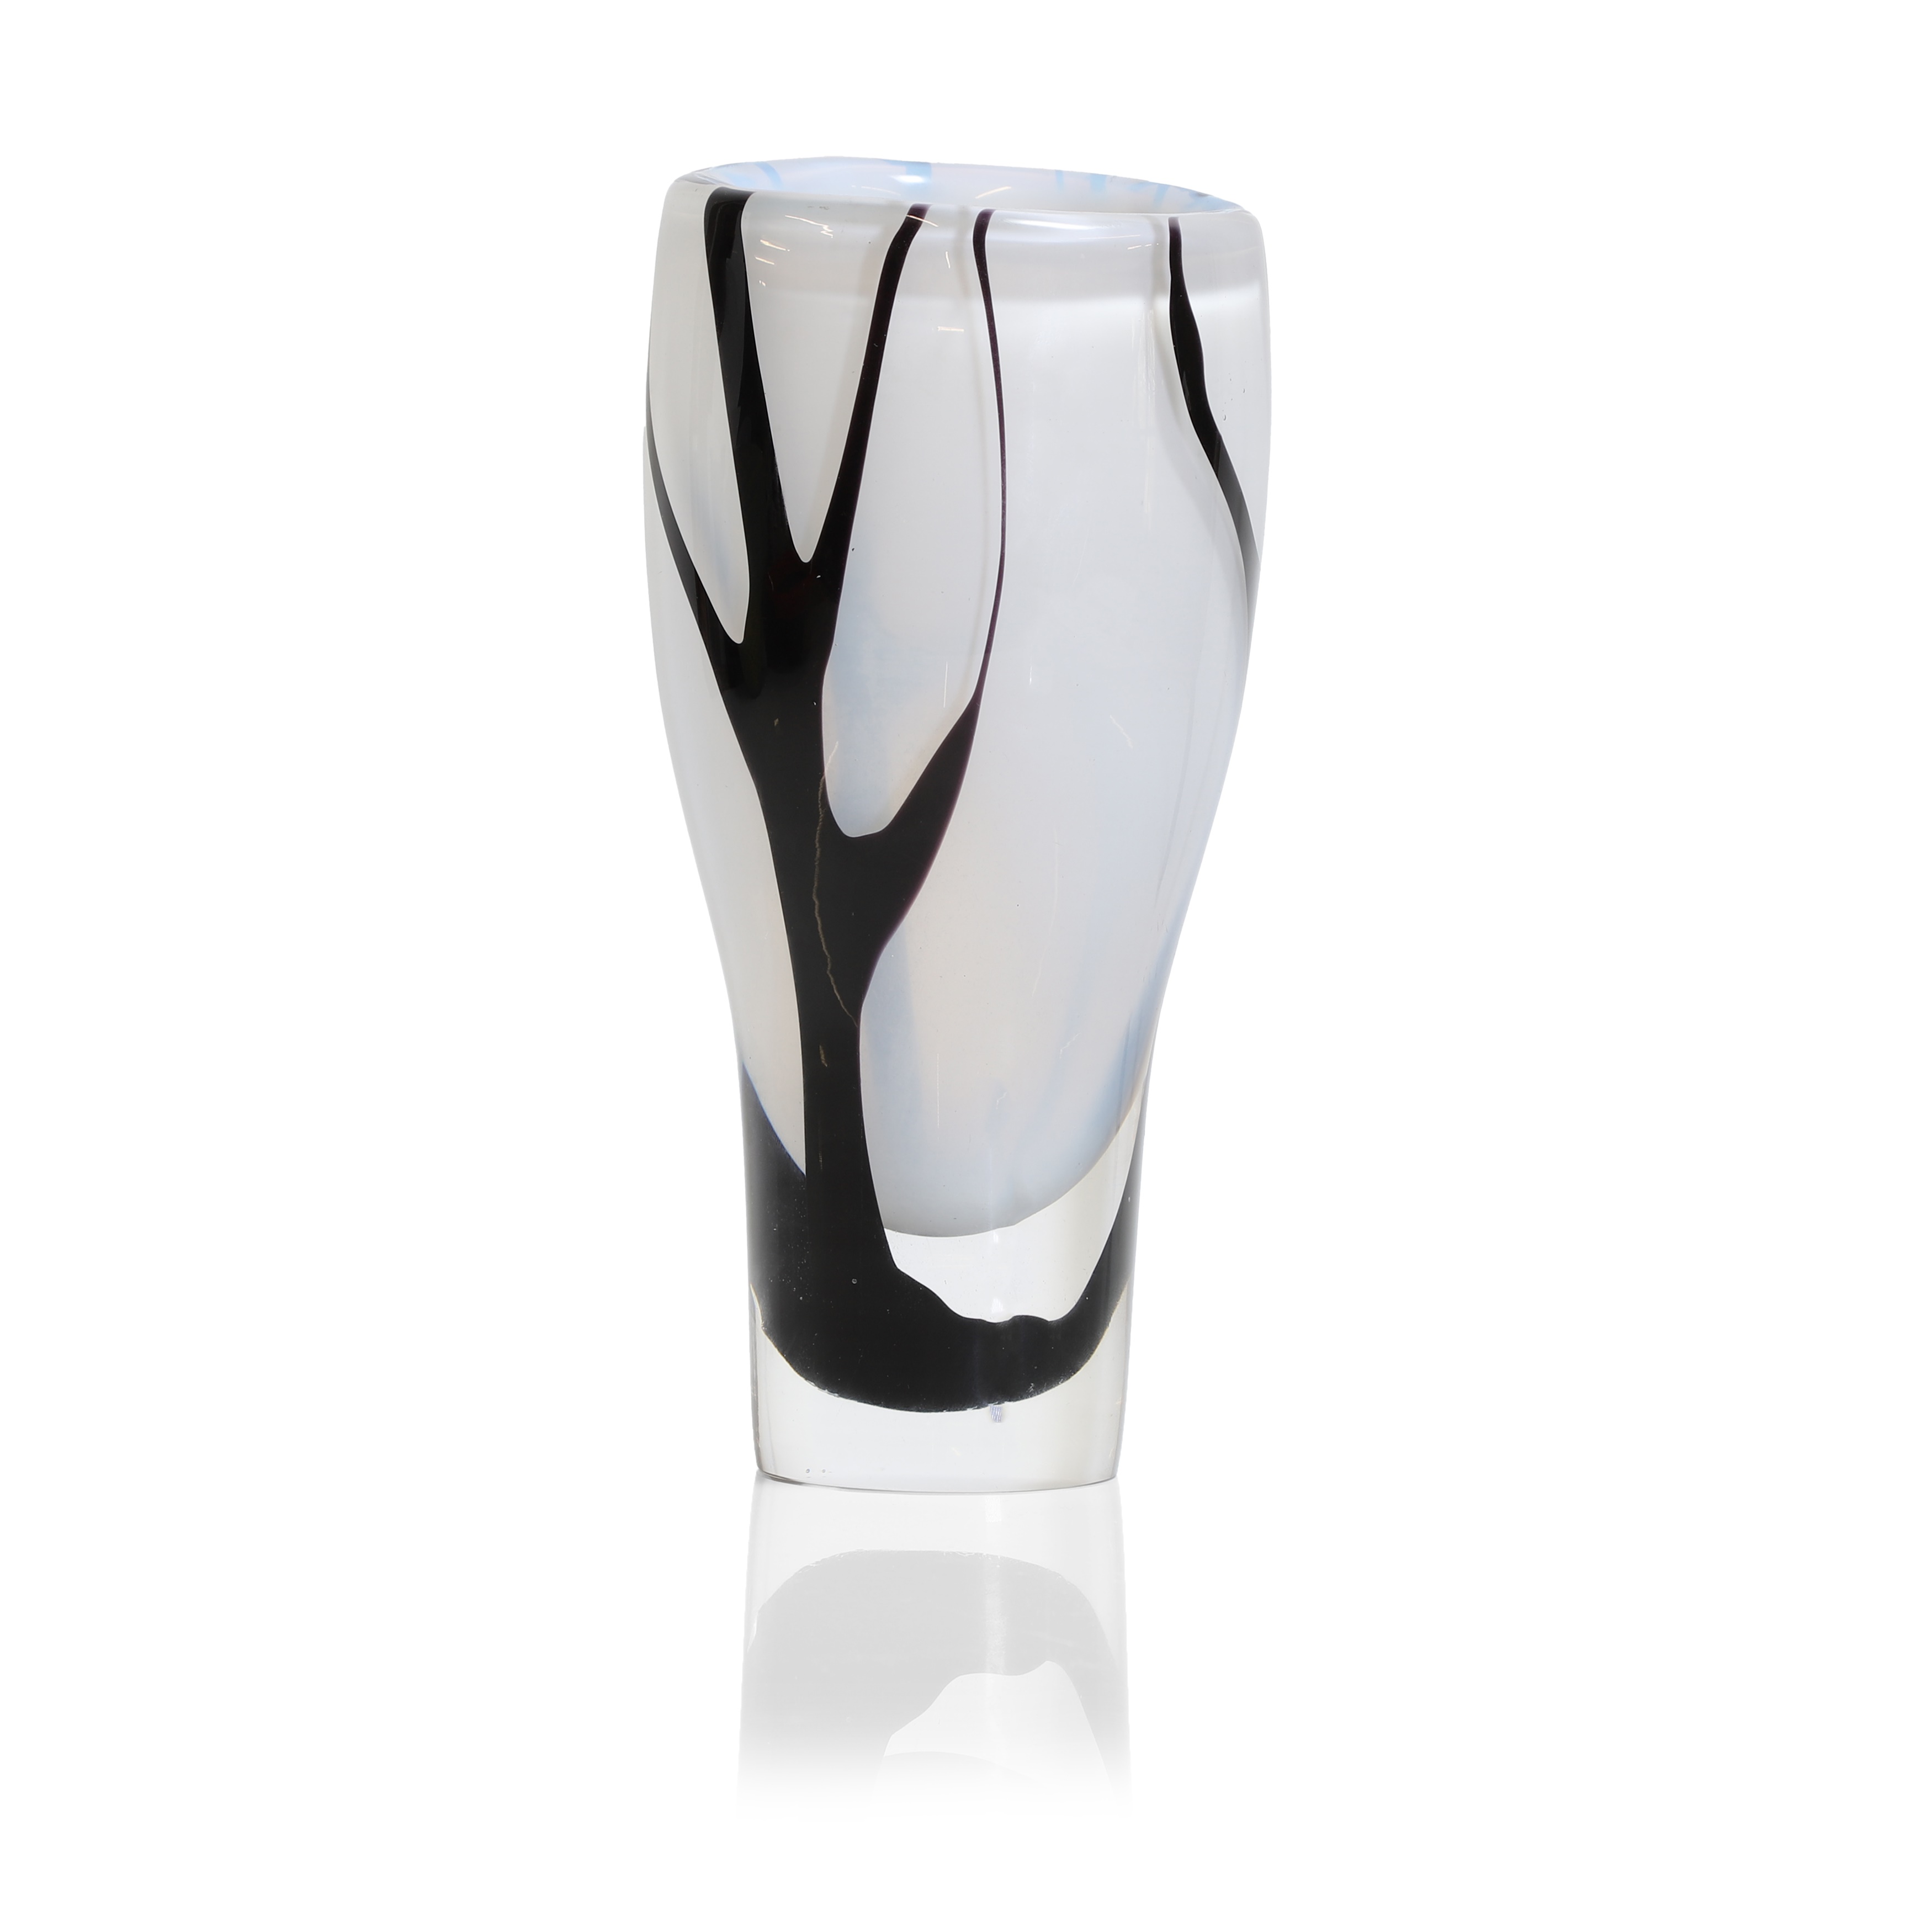 Vicke Lindstrand (Swedish, 1904-1983) a 'Träd i dimma' (Trees in fog) glass vase, designed in 1951 for Kosta, the clear crystal underlaid with opalescent glass and decorated in black with the outline of trees, signed with acid stamp LIND-STRAND KOSTA and engraved LU 2005 34cm high (£1,000-1,500)